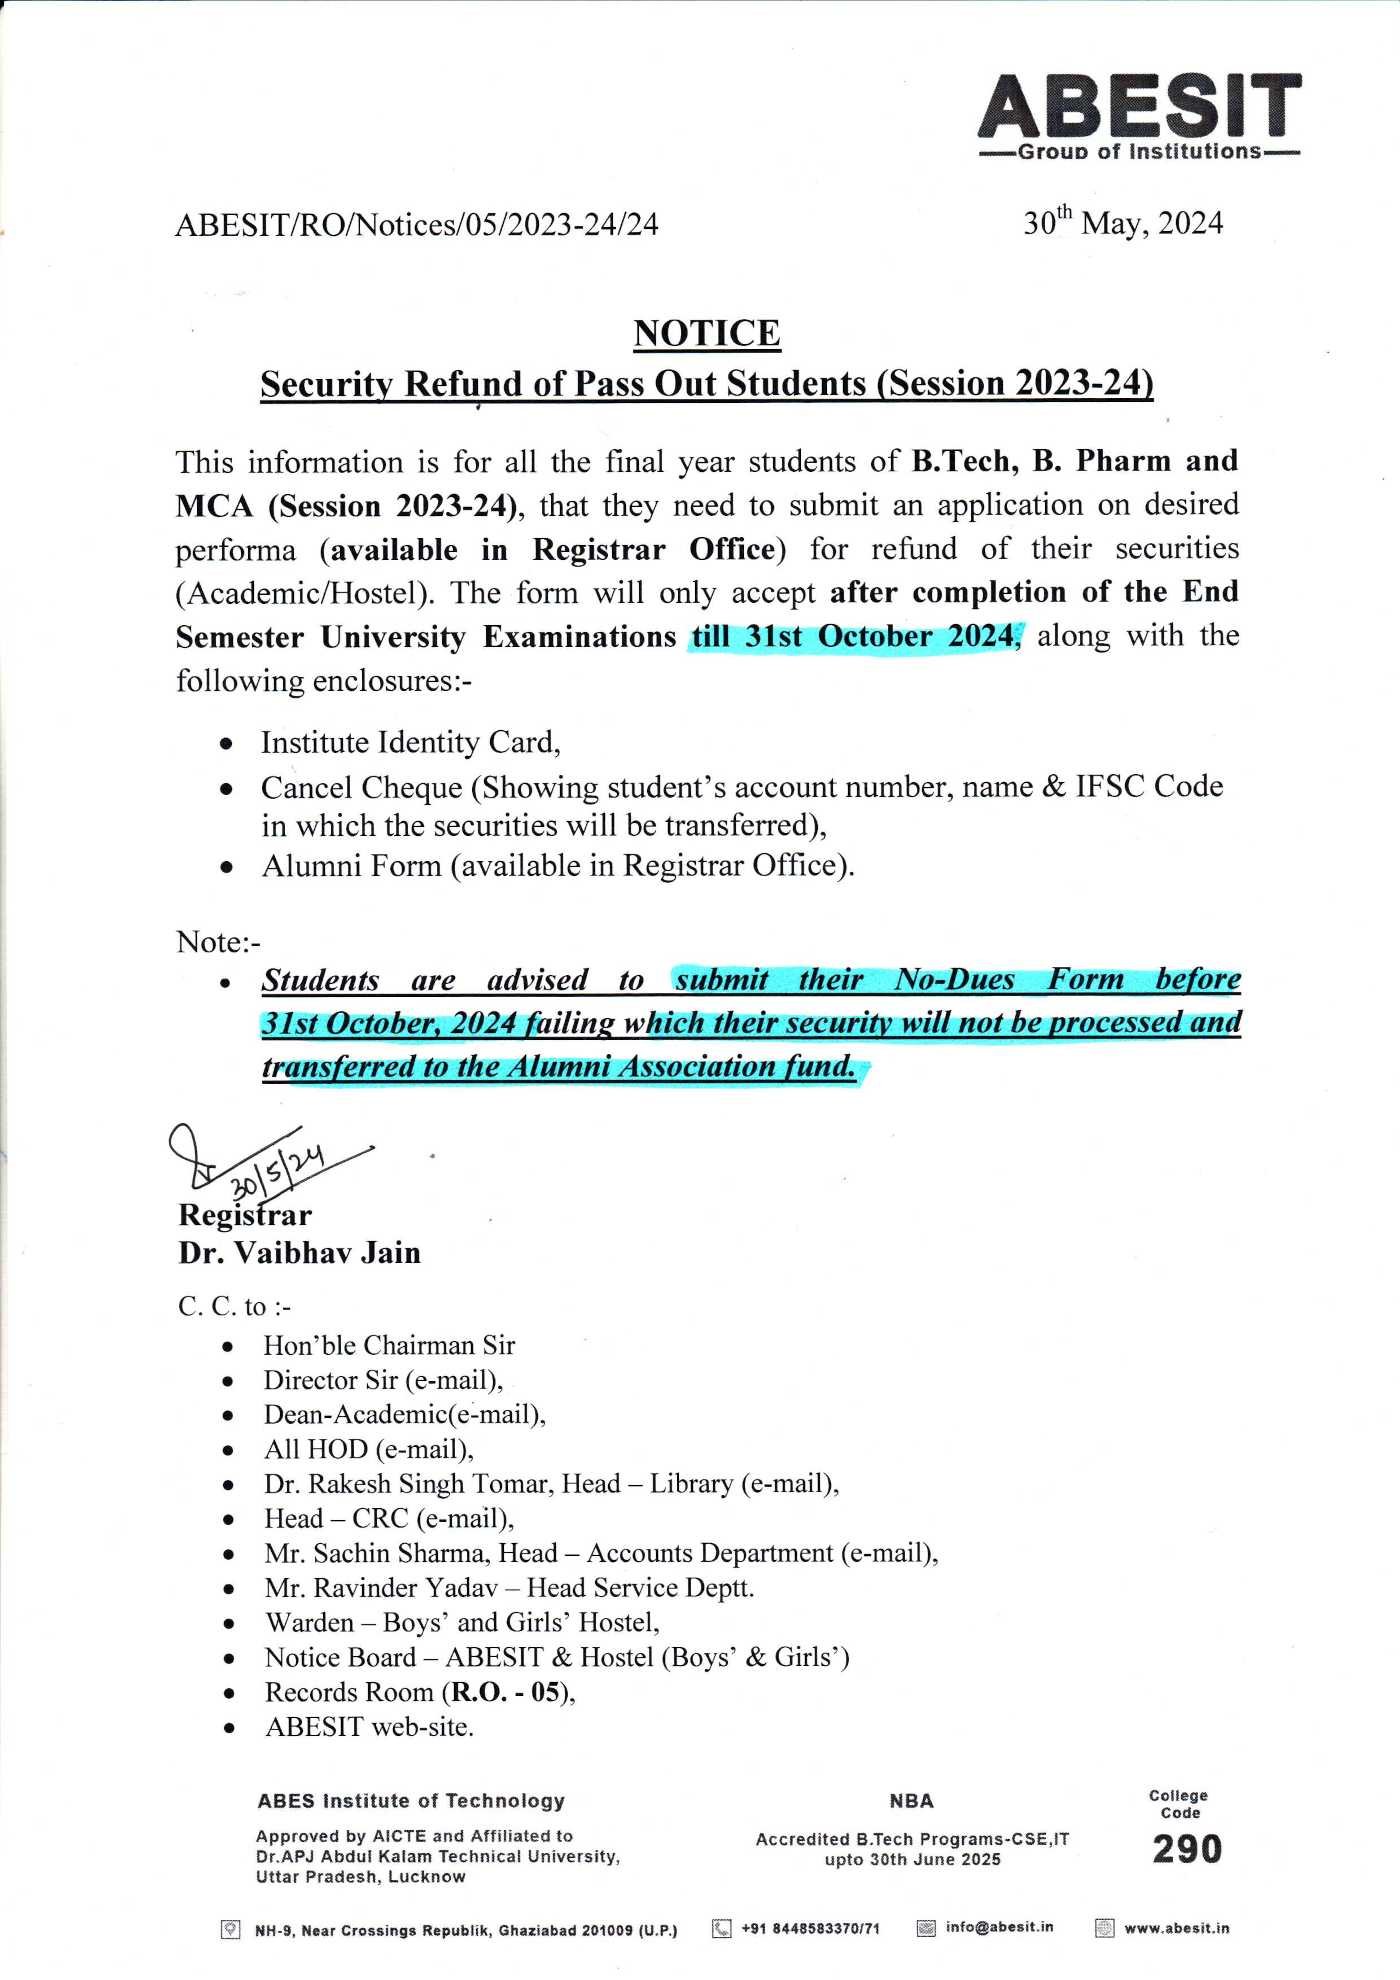 Security Refund of Pass Out Students (Session 2023-24)